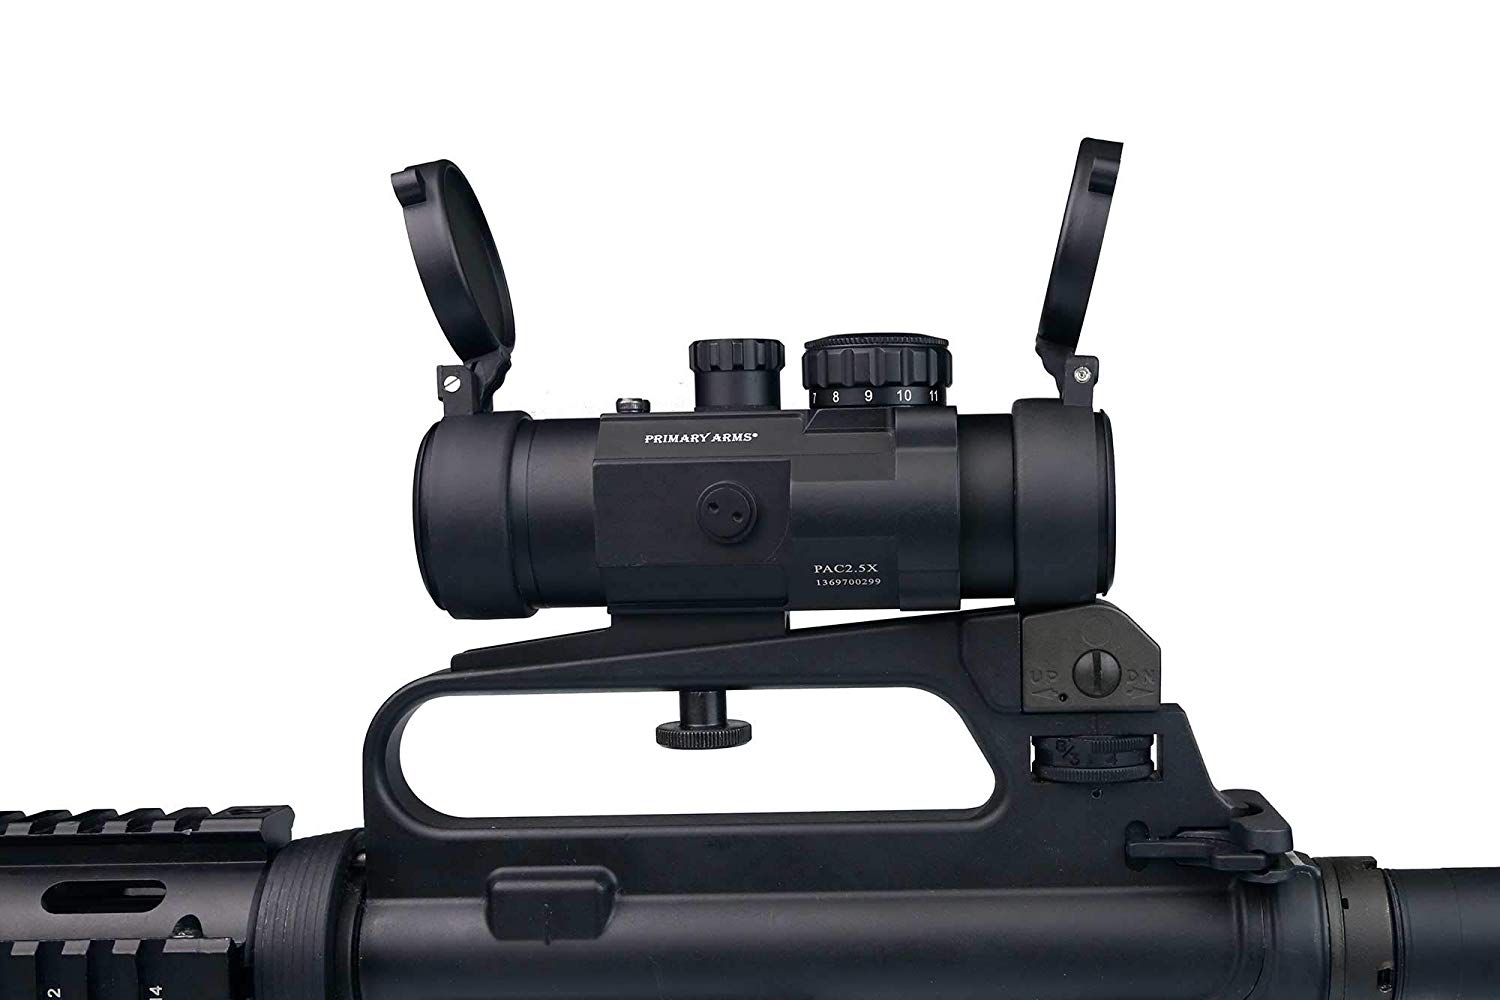 Primary Arms SLx 2.5x32 Compact Prism Scope